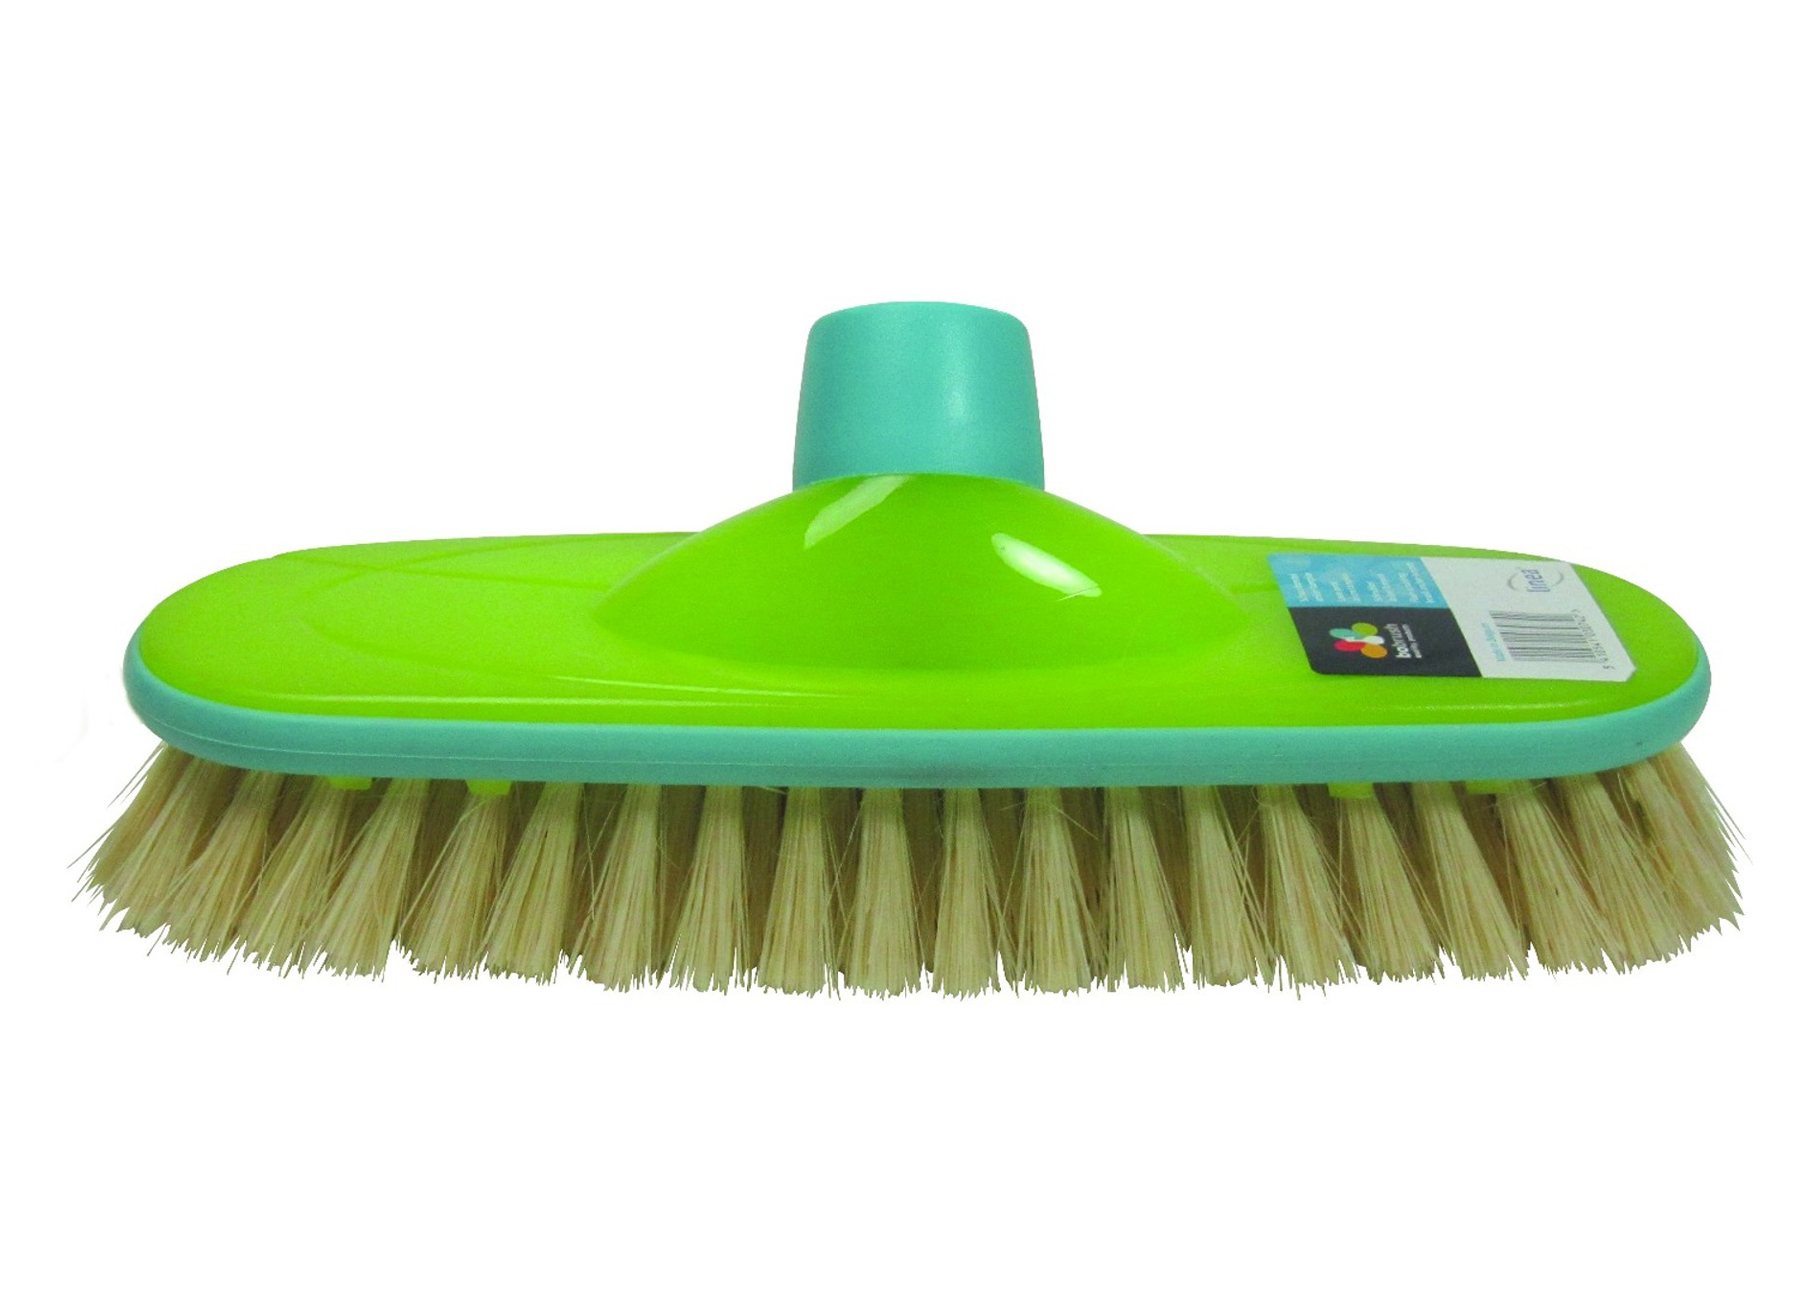 LINEA SOFTWISE BROSSE A RECURER TAMPICO 23CM